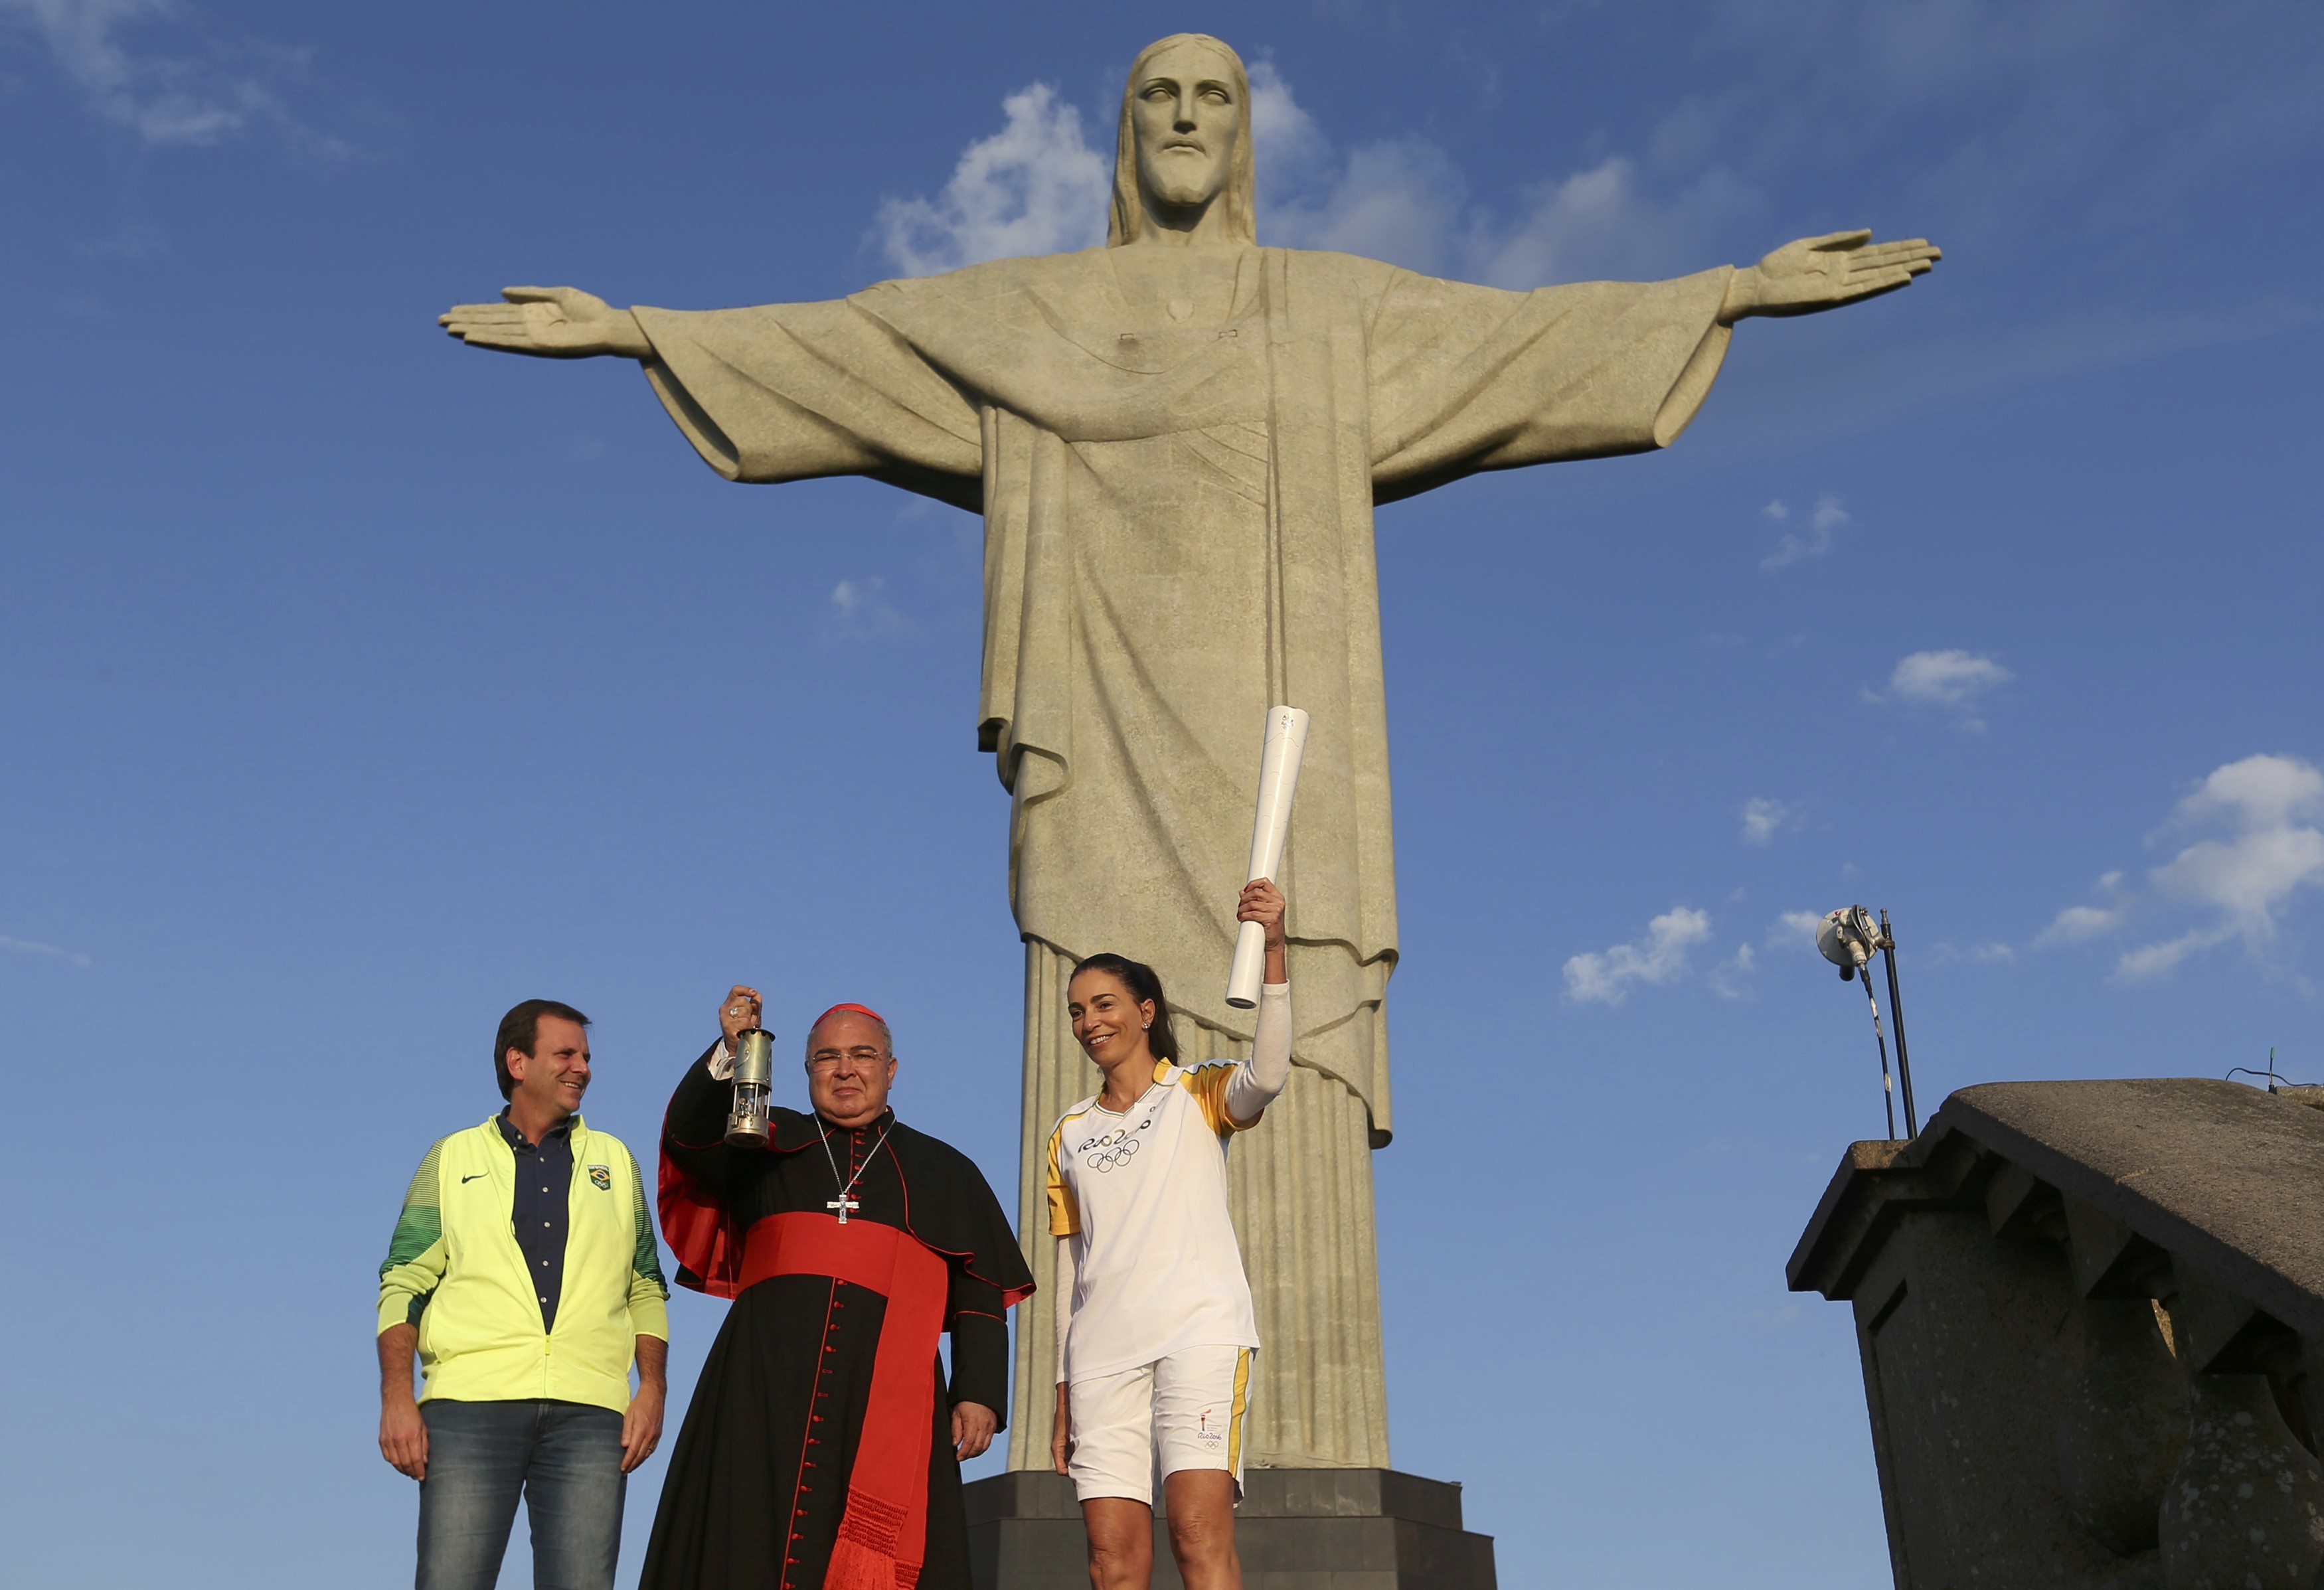 Cardinal Orani Tempesta of Rio de Janeiro holds the Olympic flame Aug. 5 as Rio Mayor Eduardo Paes and former Brazilian volleyball player Isabel Barroso look on in front of the Christ the Redeemer statue. (CNS photo/Pilar Olivares, Reuters)